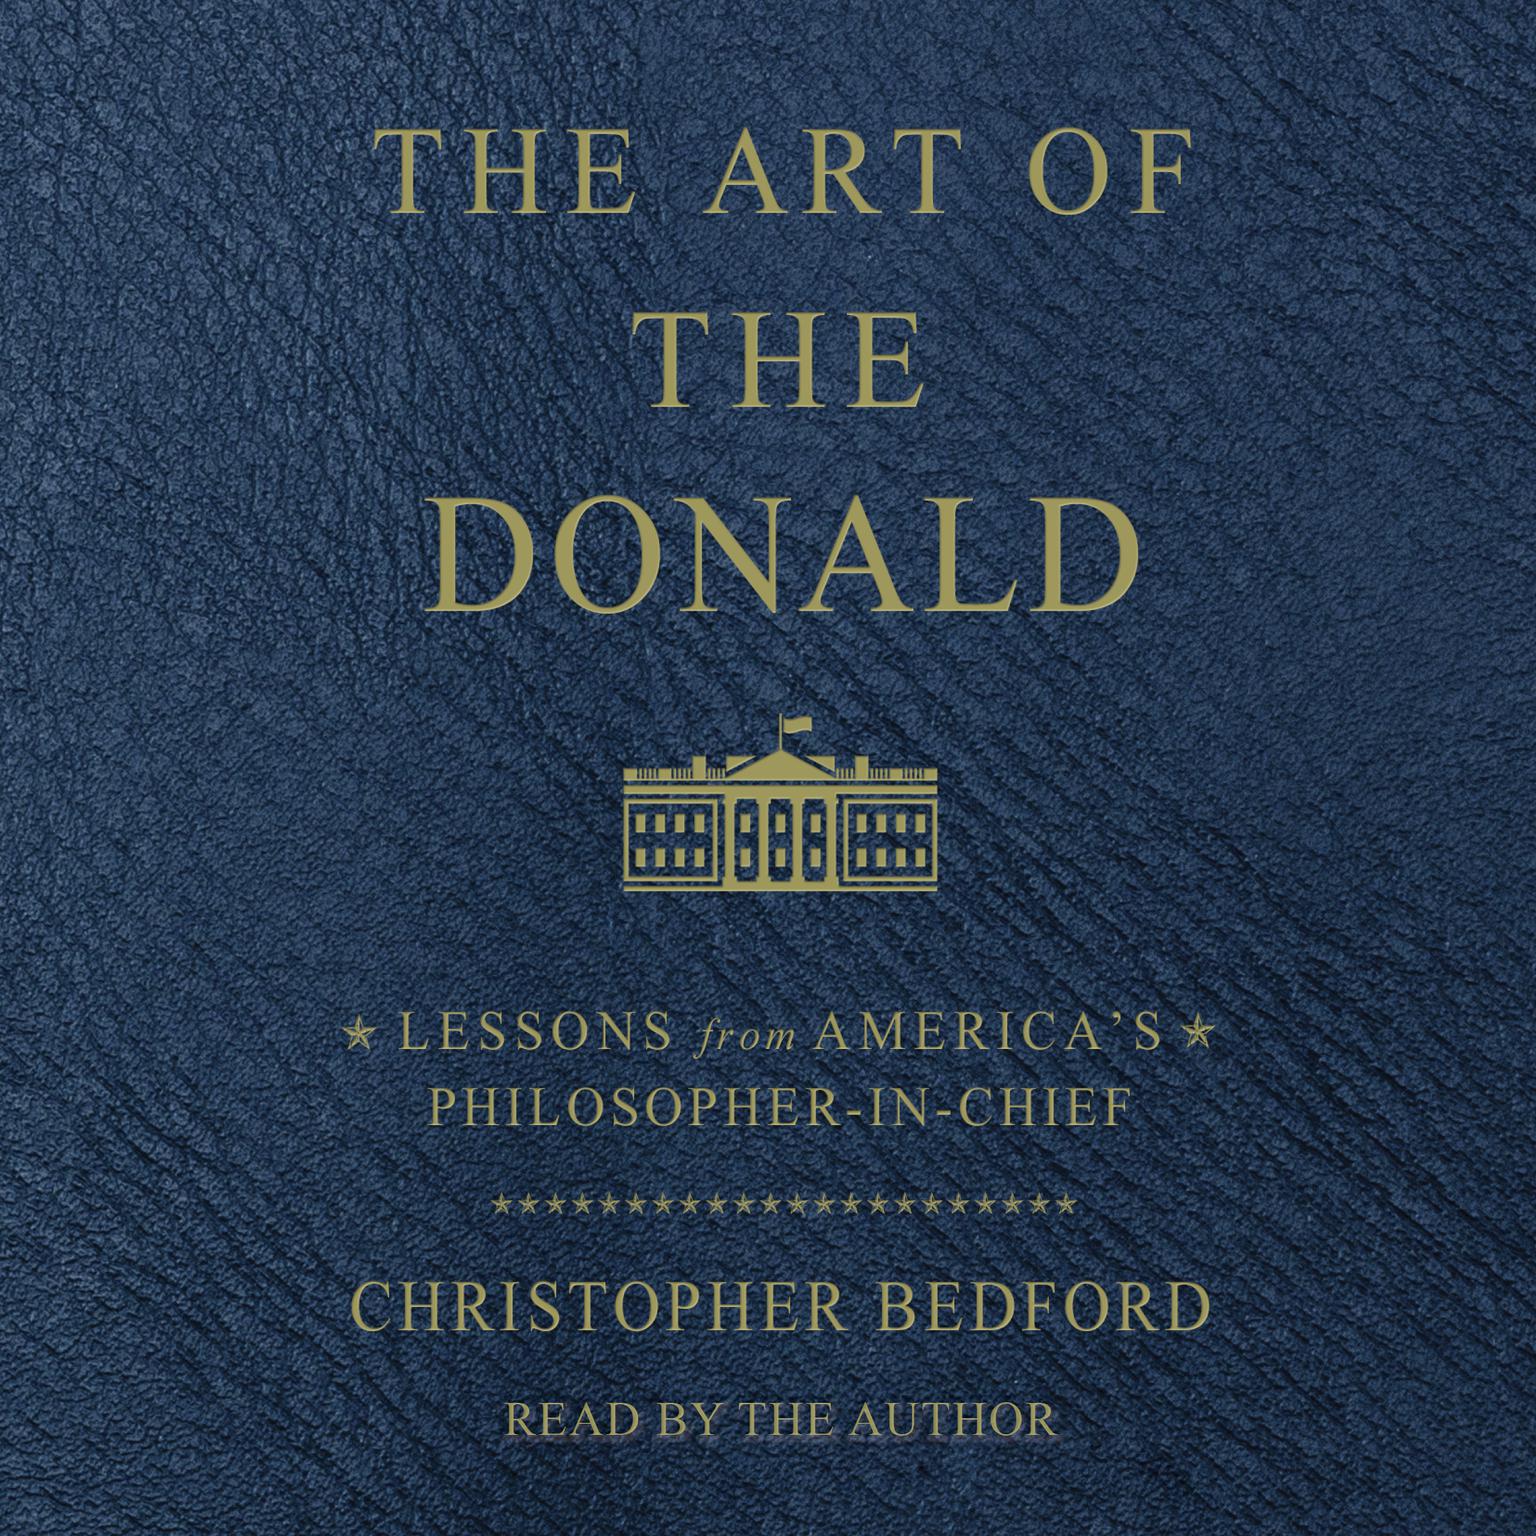 The Art of the Donald: Lessons from Americas Philosopher-in-Chief Audiobook, by Christopher Bedford